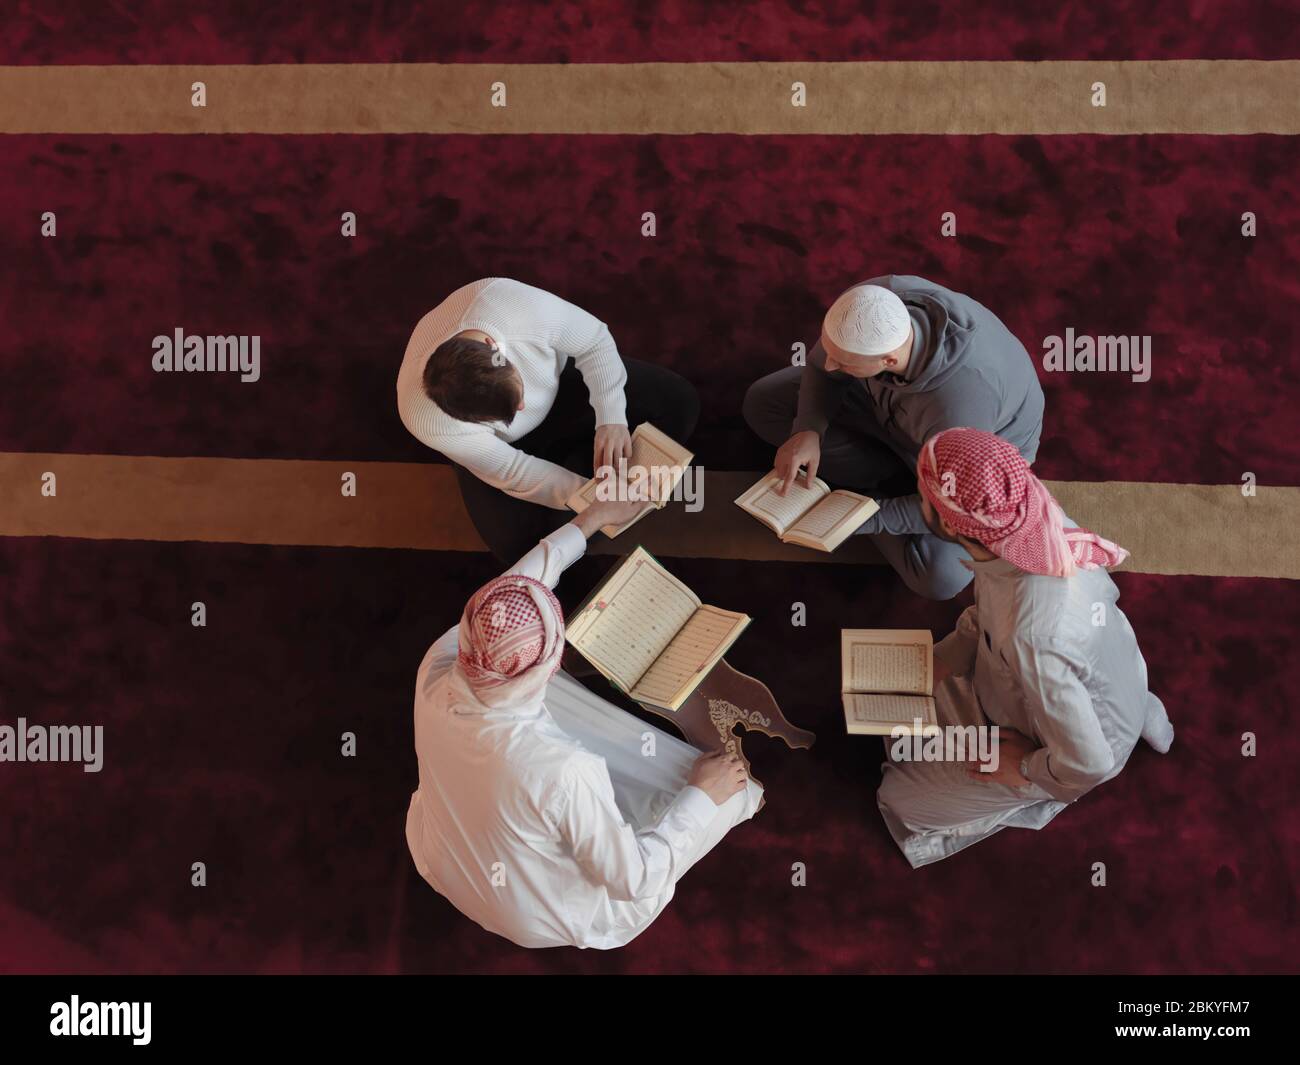 Top View Of Muslim People In Mosque Reading Quran Together Concept Of Islamic Education And School Of Holly Book Kuran Stock Photo Alamy